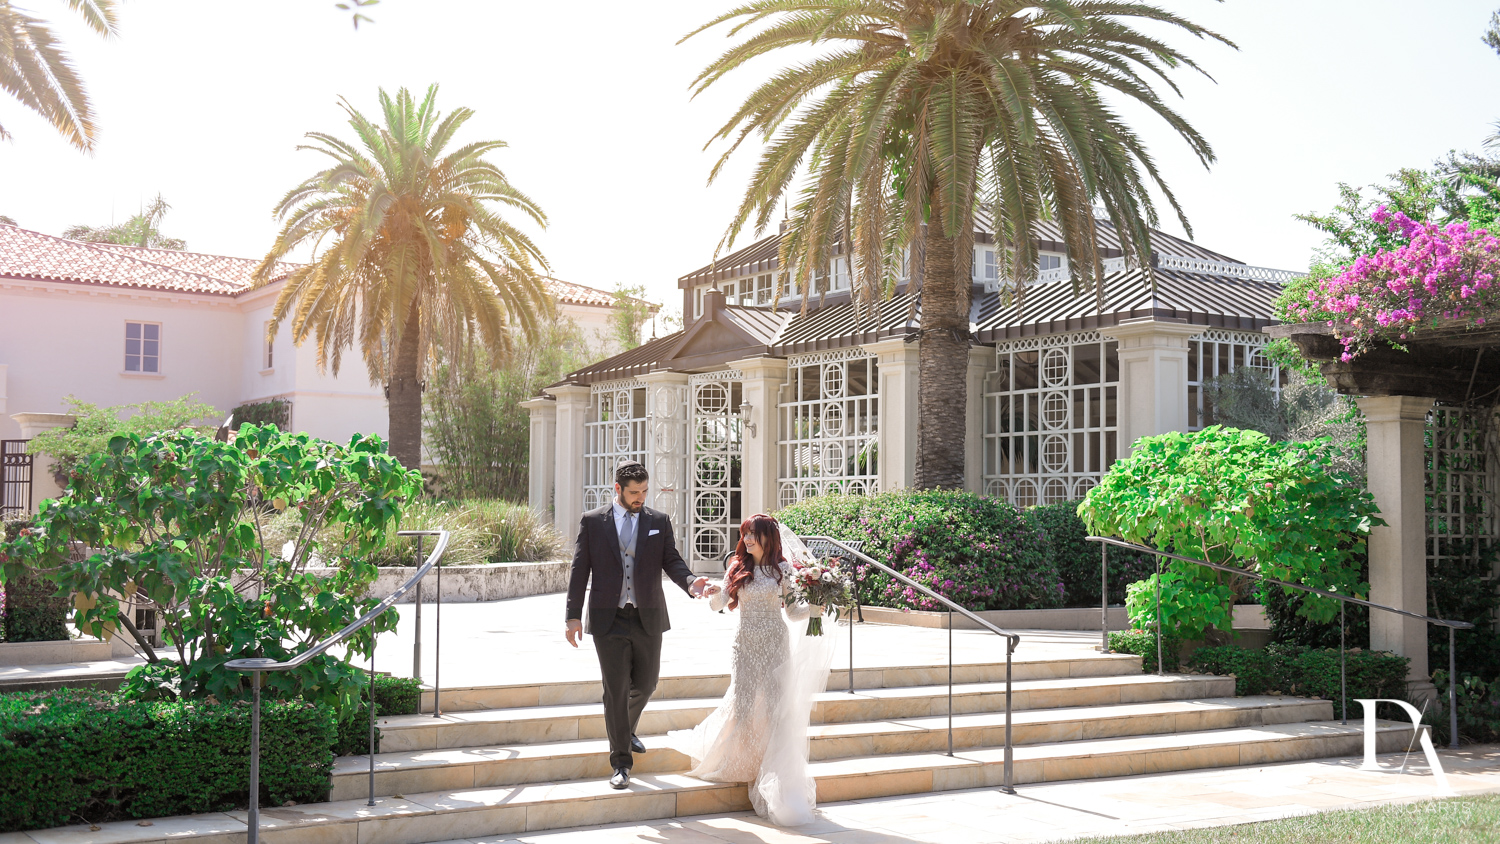 Vintage Garden Wedding at Flagler Museum Palm Beach by Domino Arts Photography